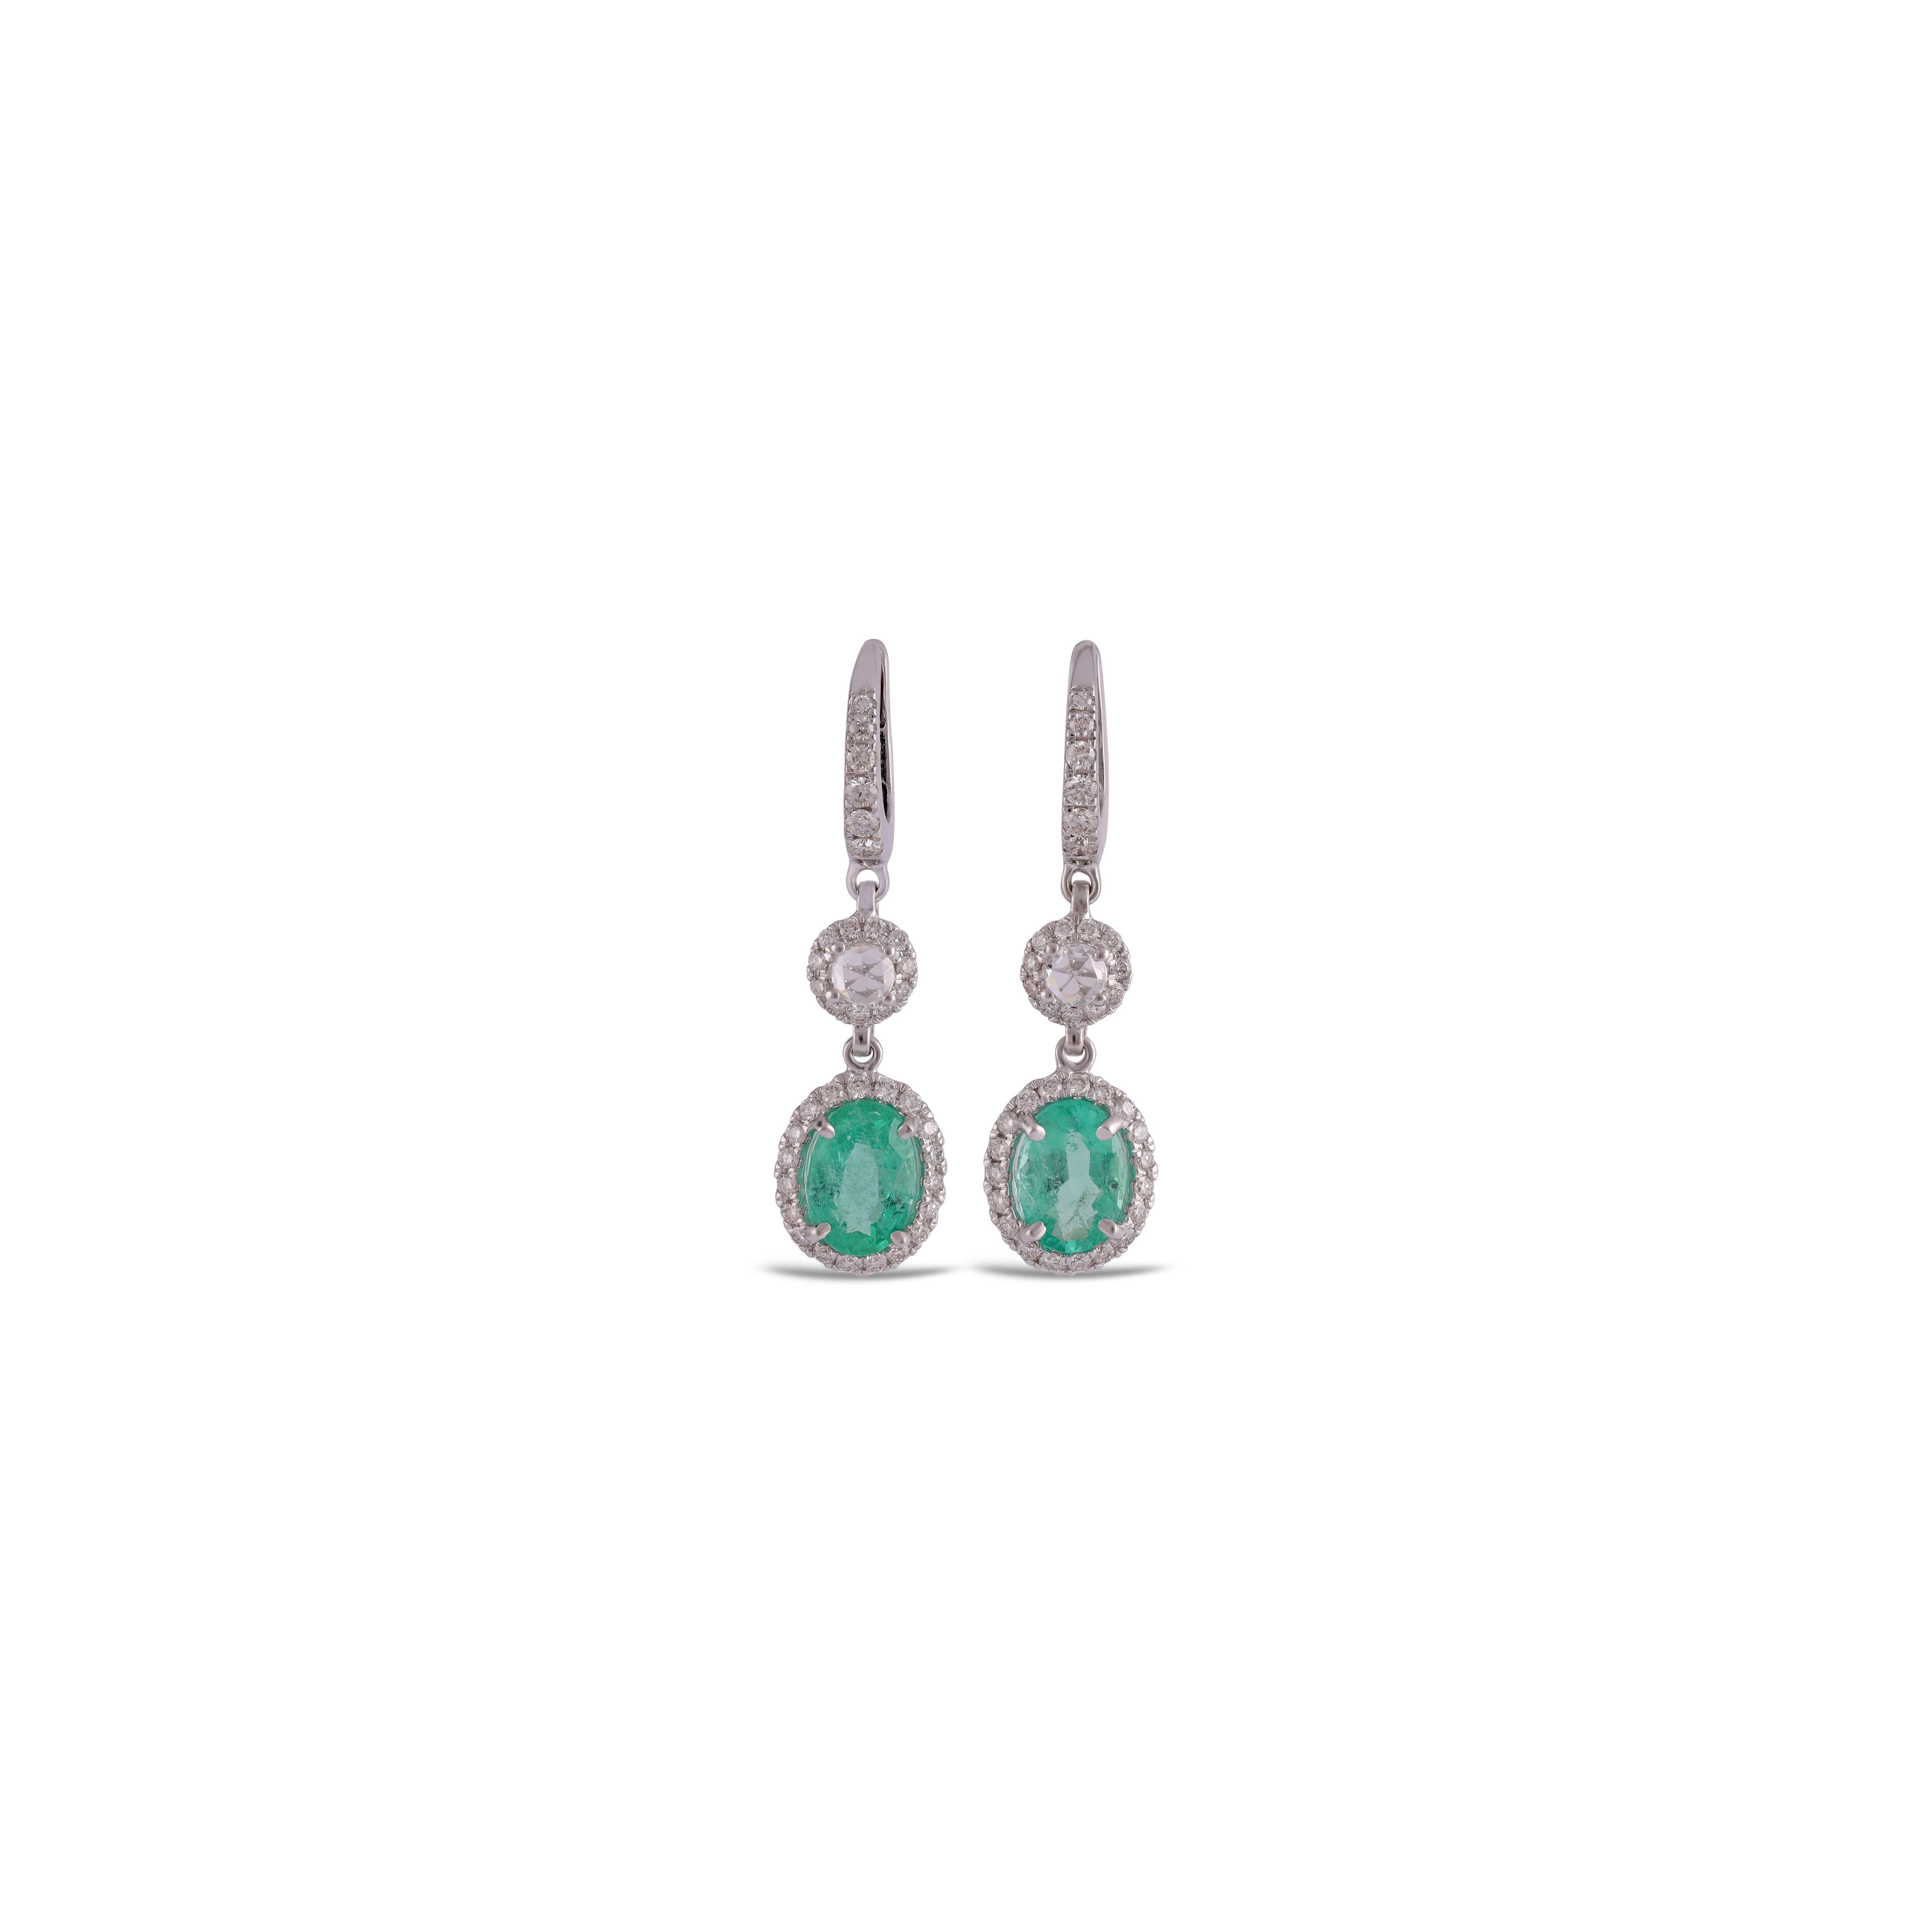 This is an elegant emerald & diamond Earring studded in 18k gold with 2 piece of  Zambian emerald weight 2.92 carat With diamonds weight 1.06 carat, this entire Earring studded in 18k gold


 its a classic wearable emerald-diamond Earring. 
